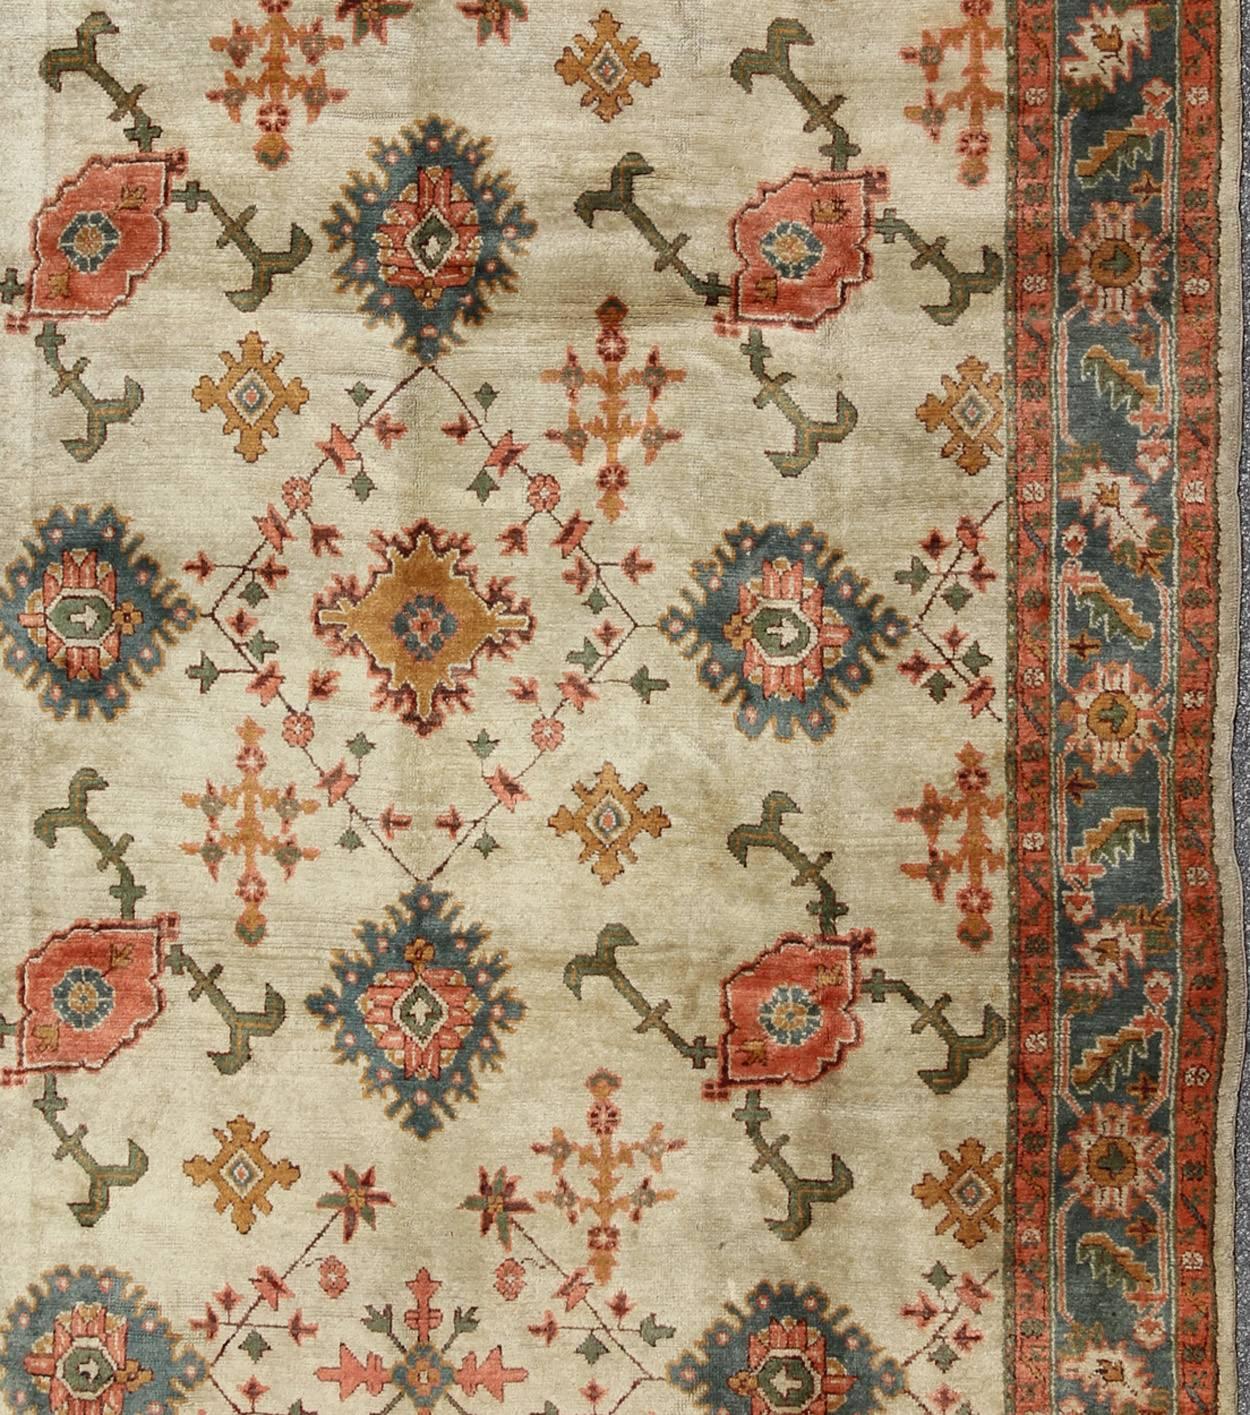 Antique Turkish Oushak Rug With All Over Design in Teal, Cream & Coral In Excellent Condition For Sale In Atlanta, GA